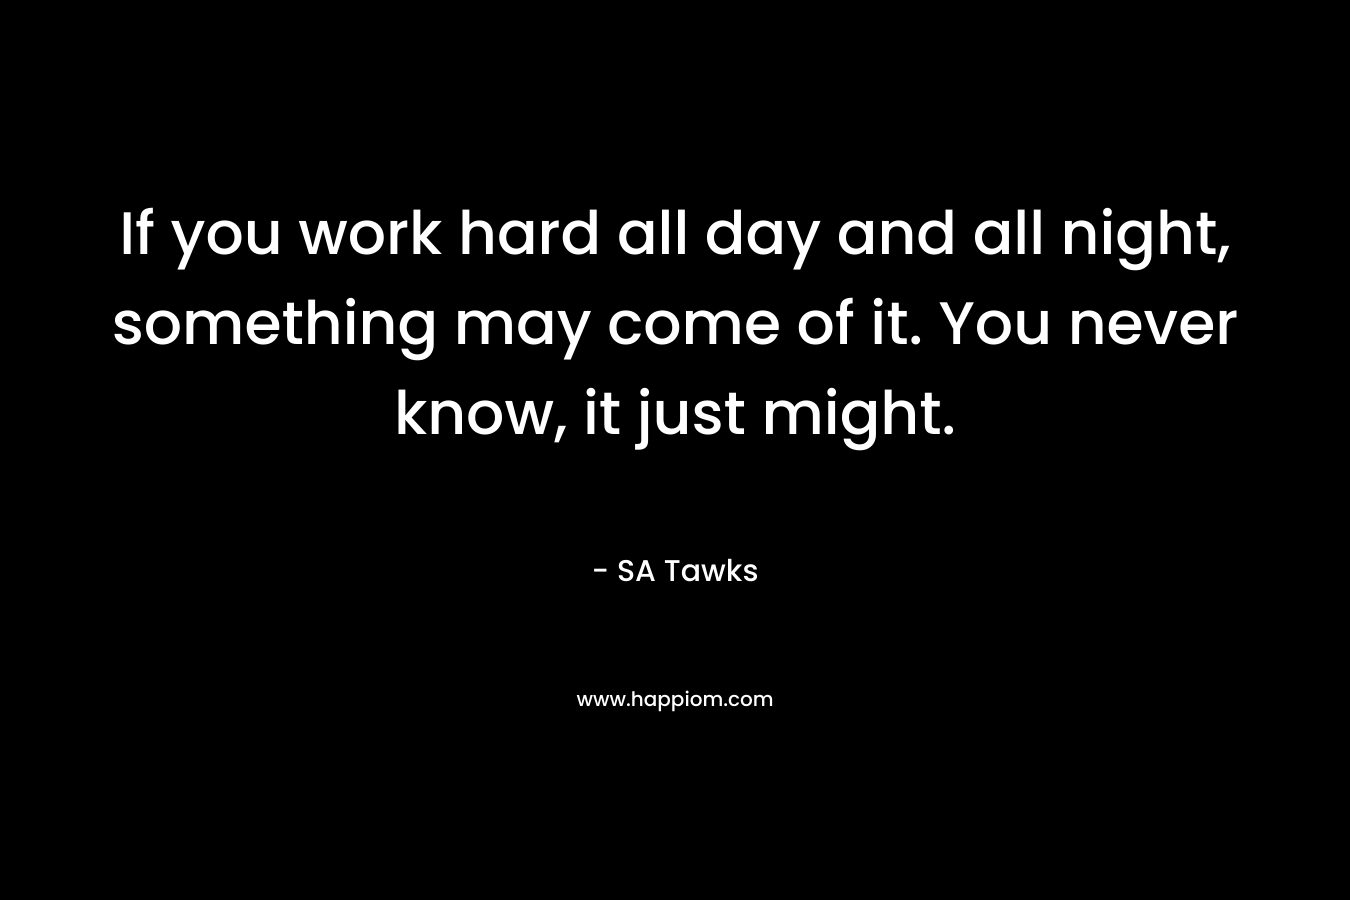 If you work hard all day and all night, something may come of it. You never know, it just might.